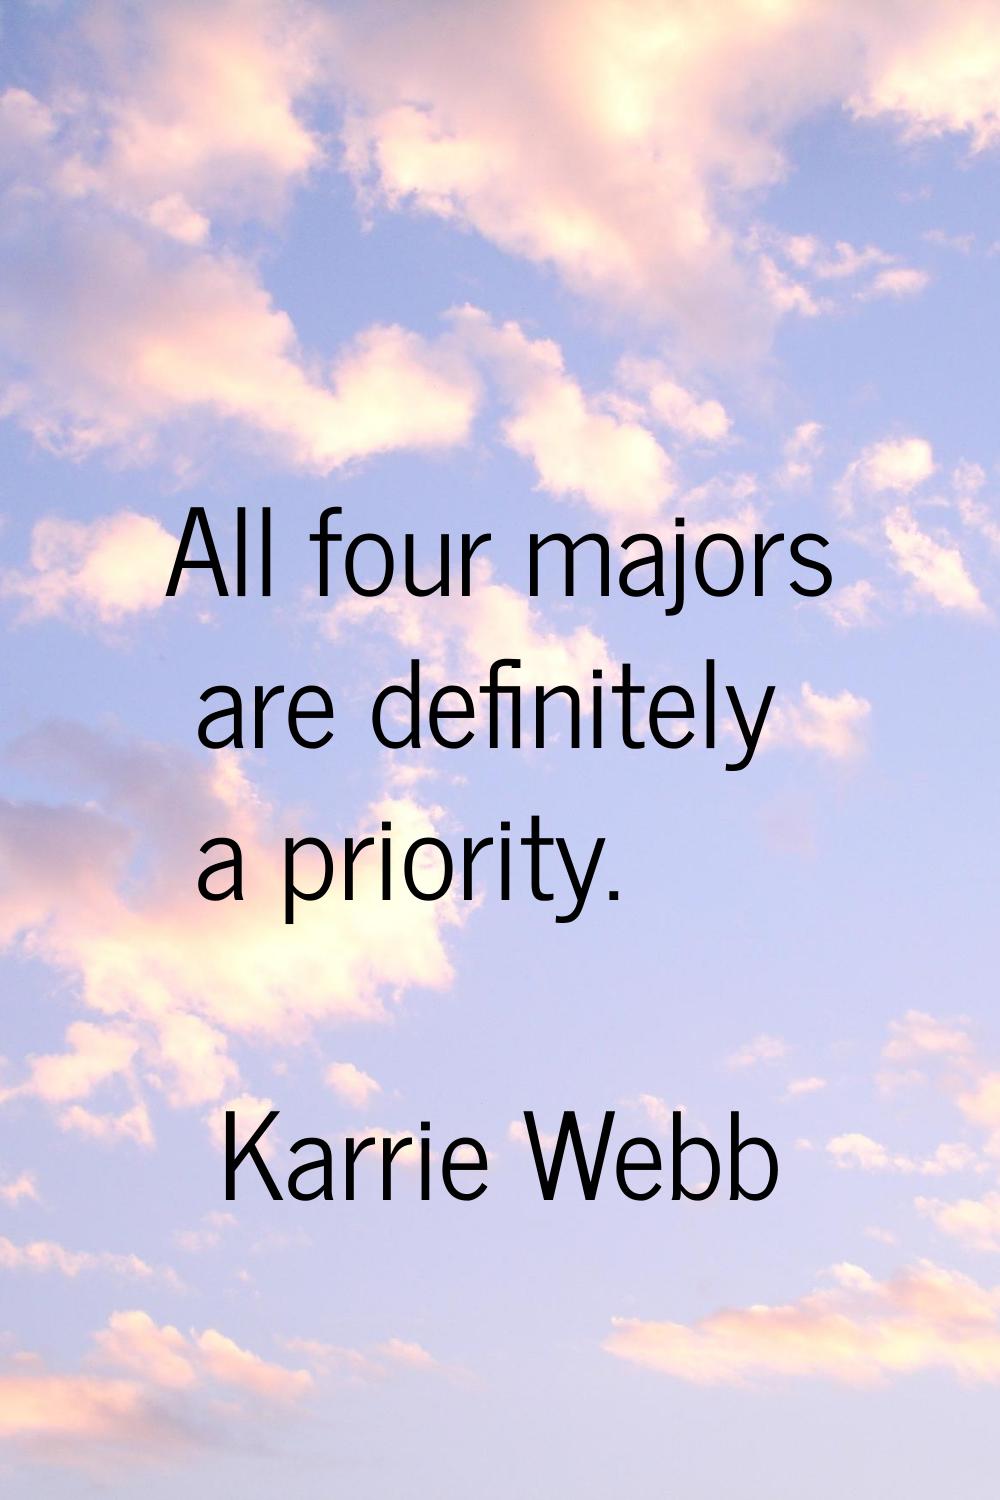 All four majors are definitely a priority.